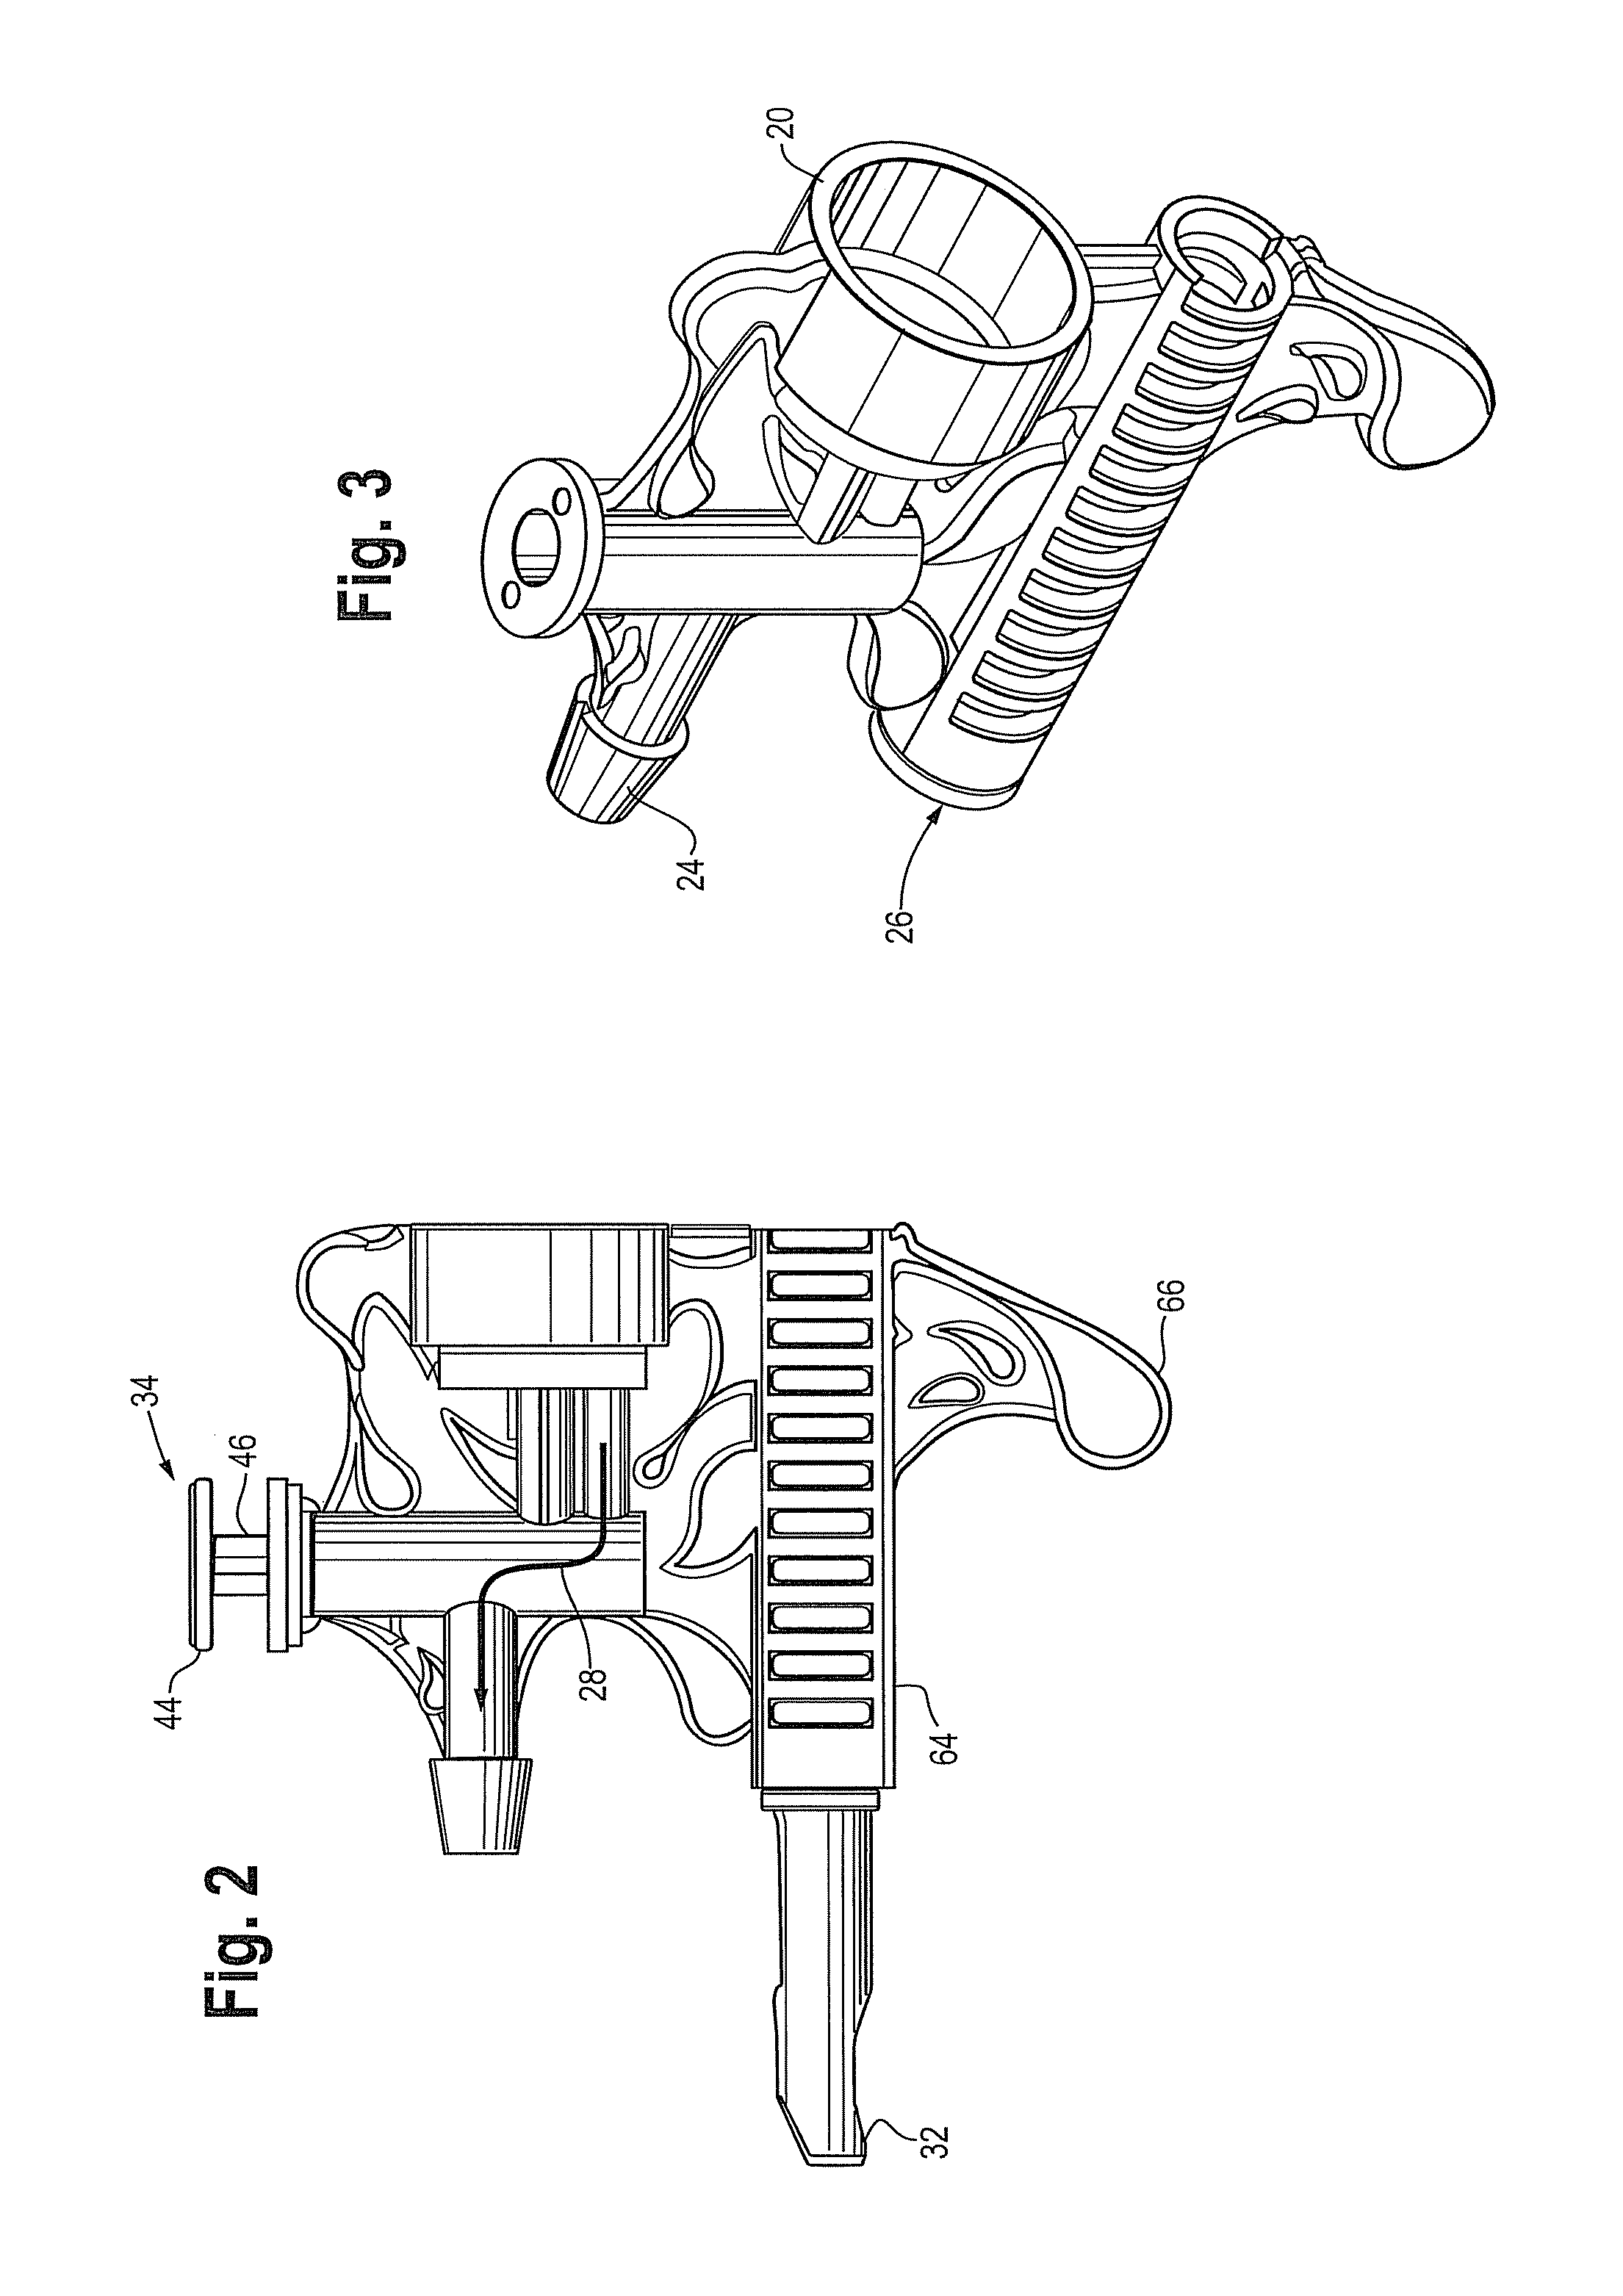 Balloon filling device